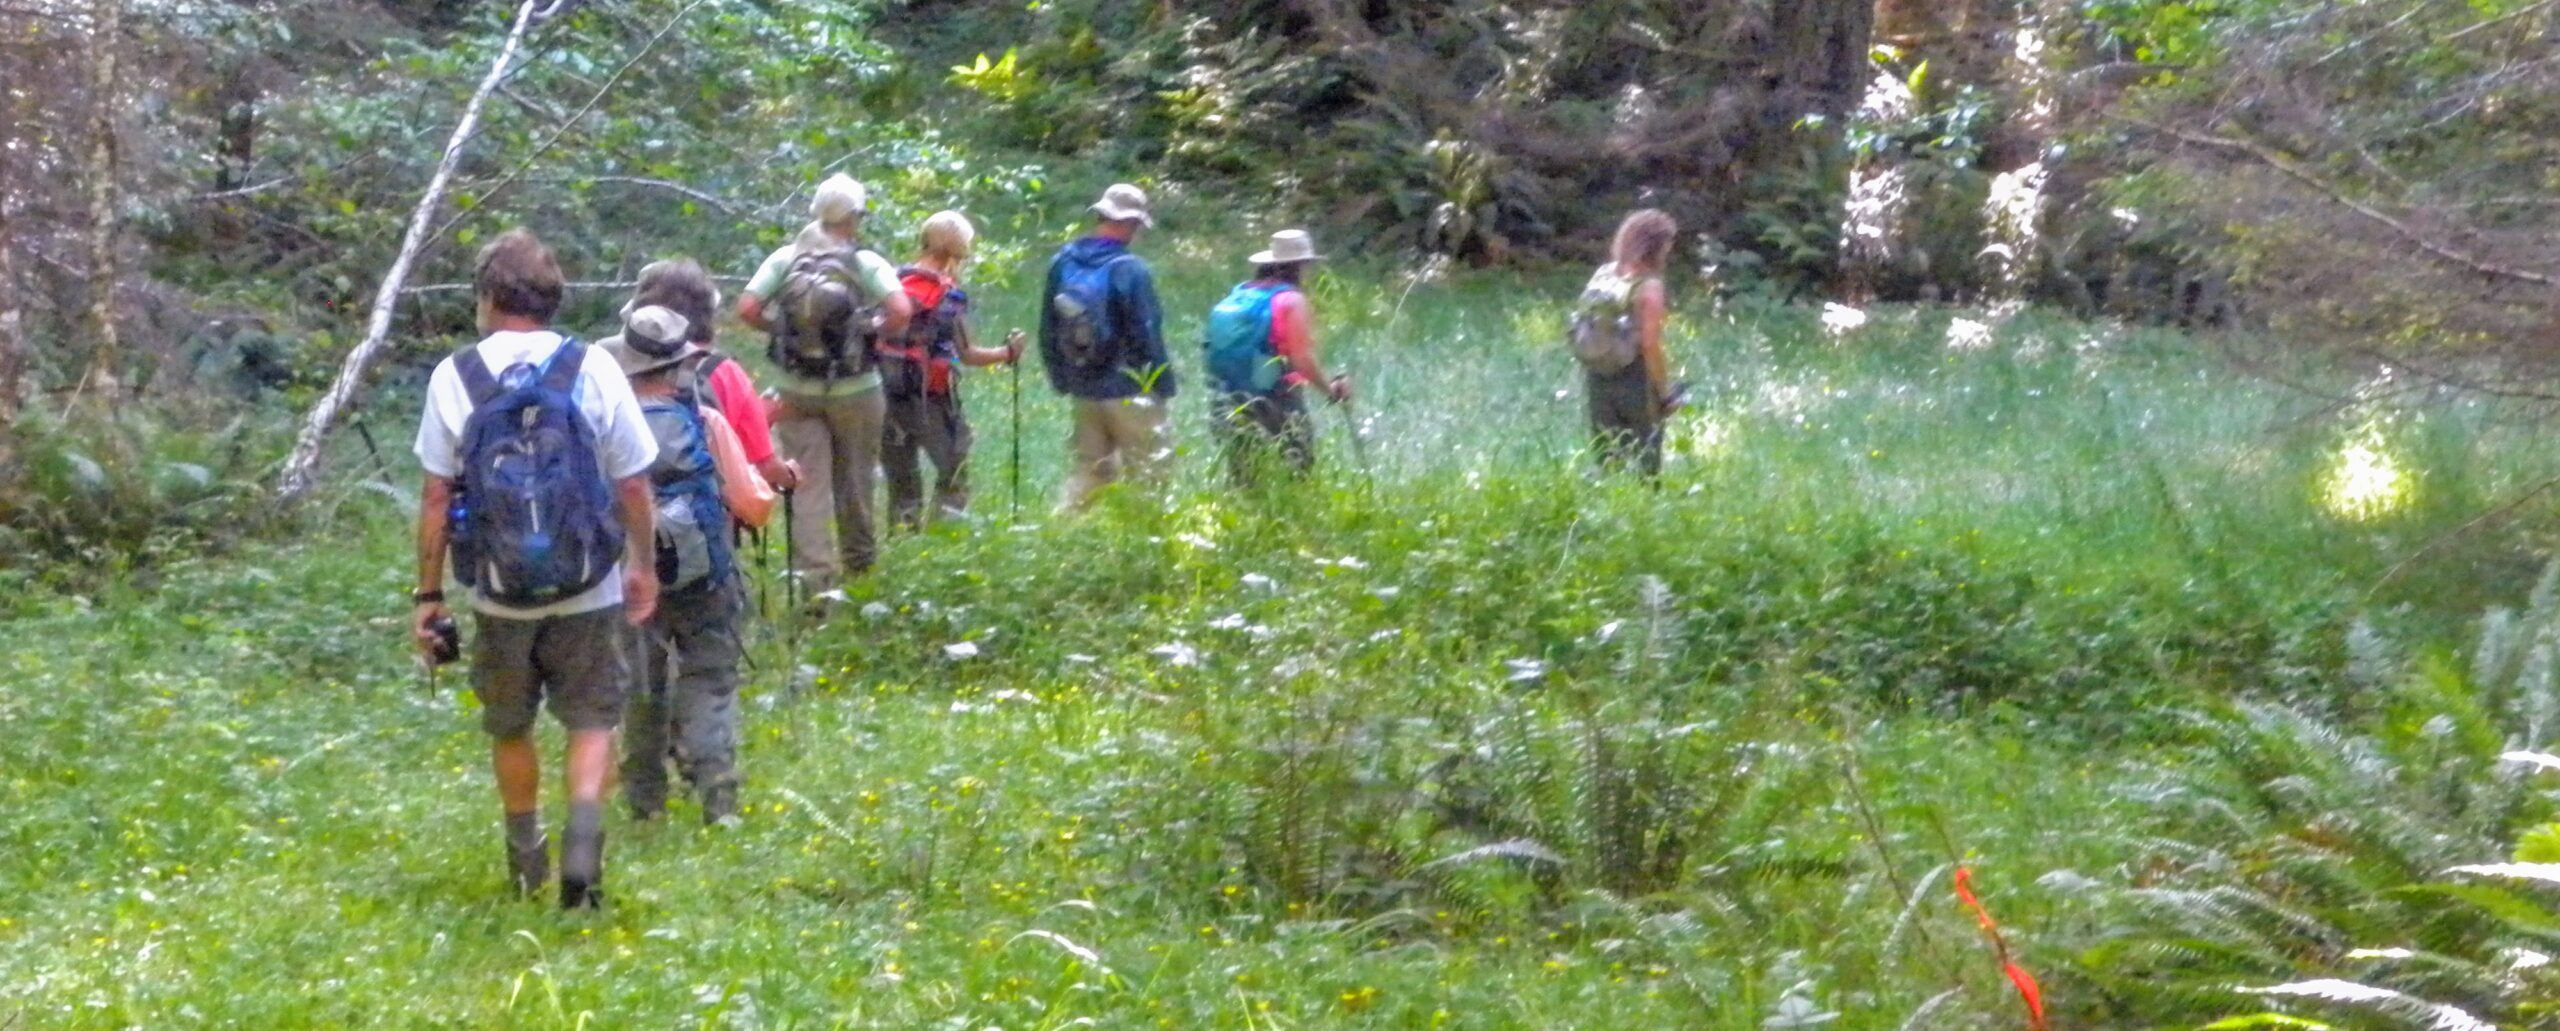 hikers moving along trail